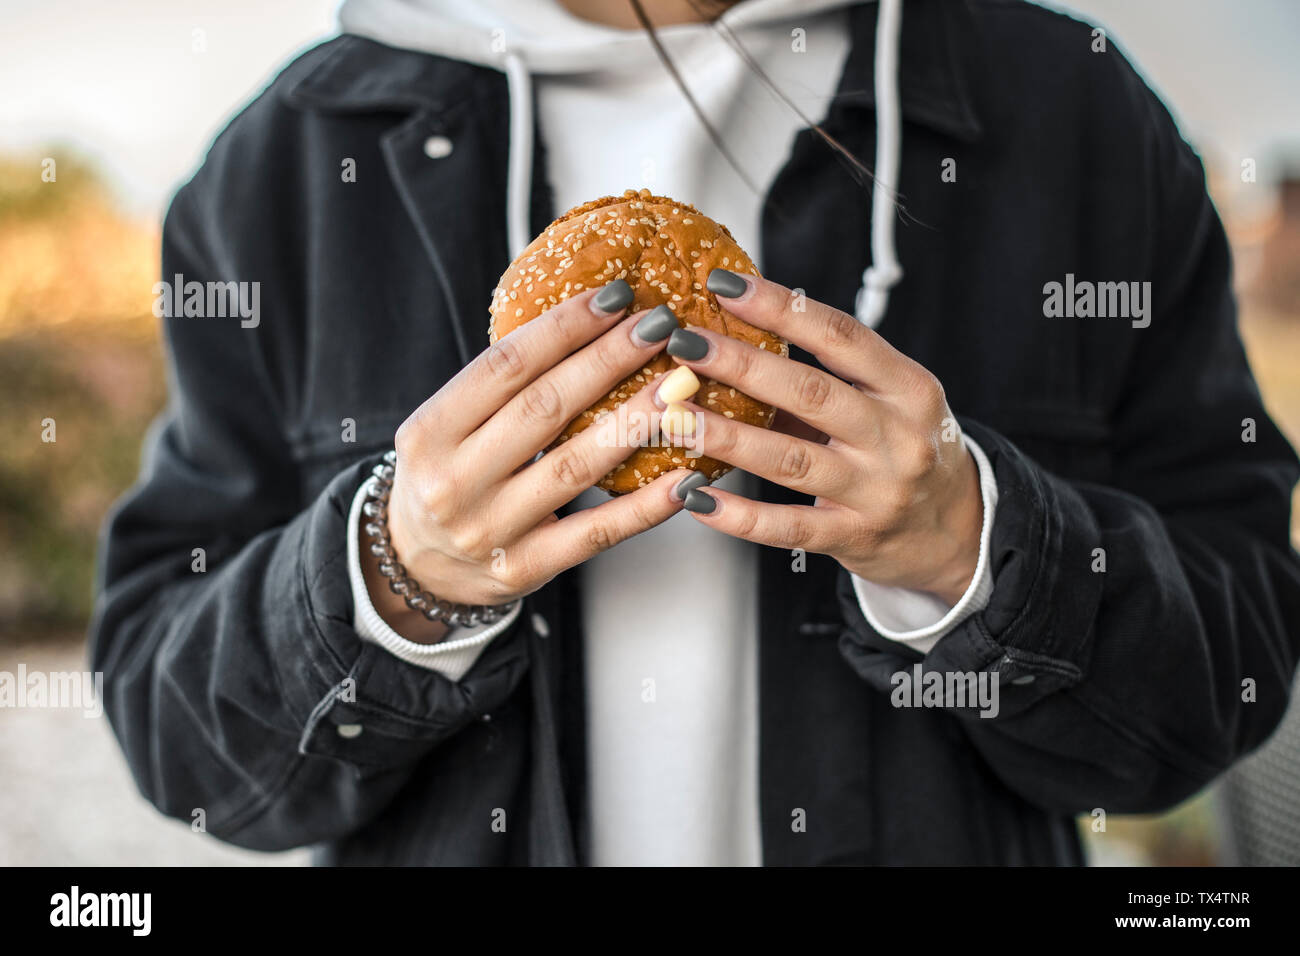 Hands of young woman with painted nails holding a hamburger, close-up Stock Photo